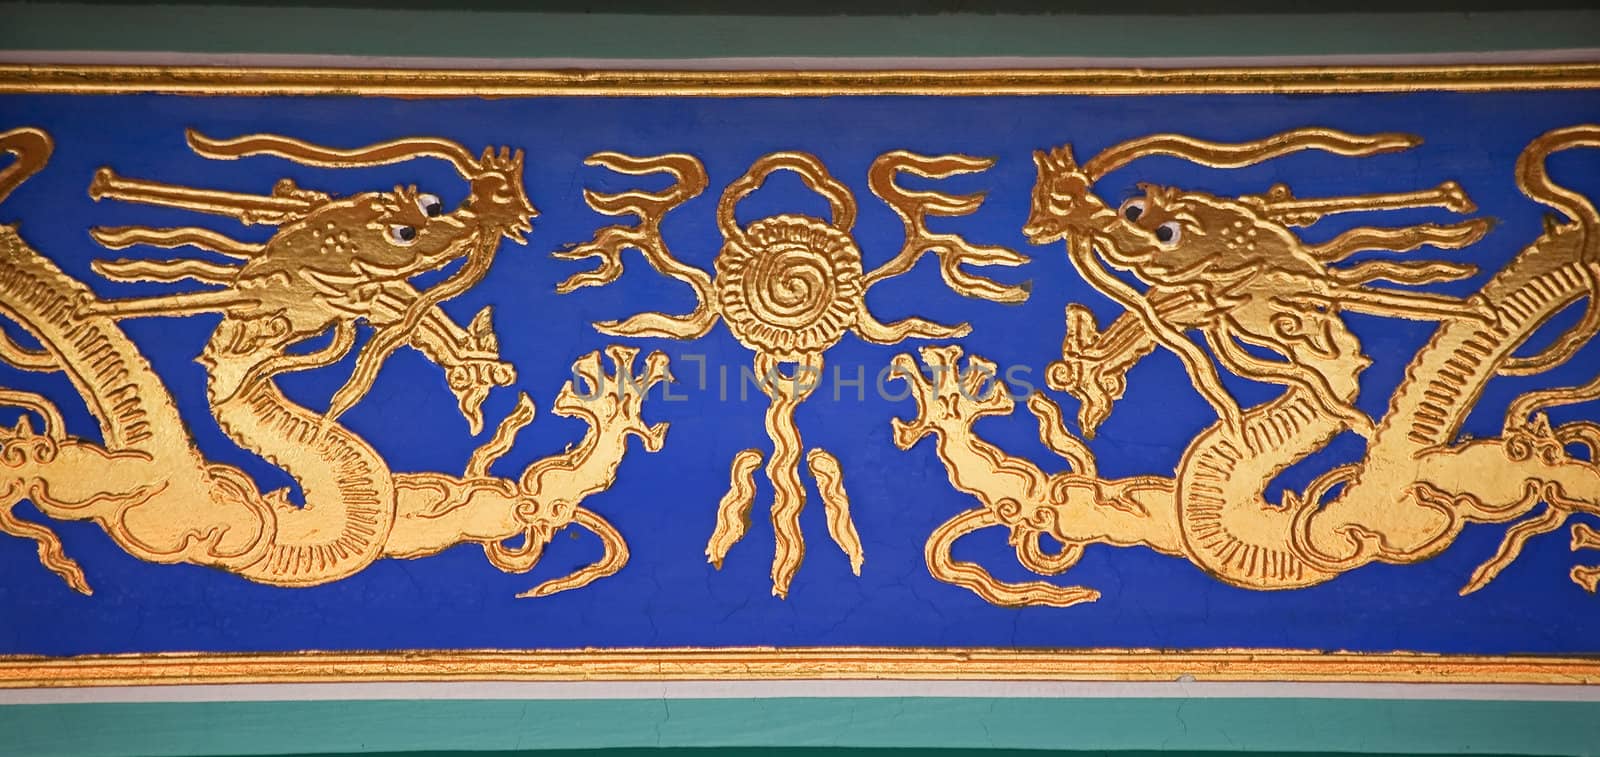 Golden Dragon Decorations Gugong Forbidden City Palace Beijing C by bill_perry